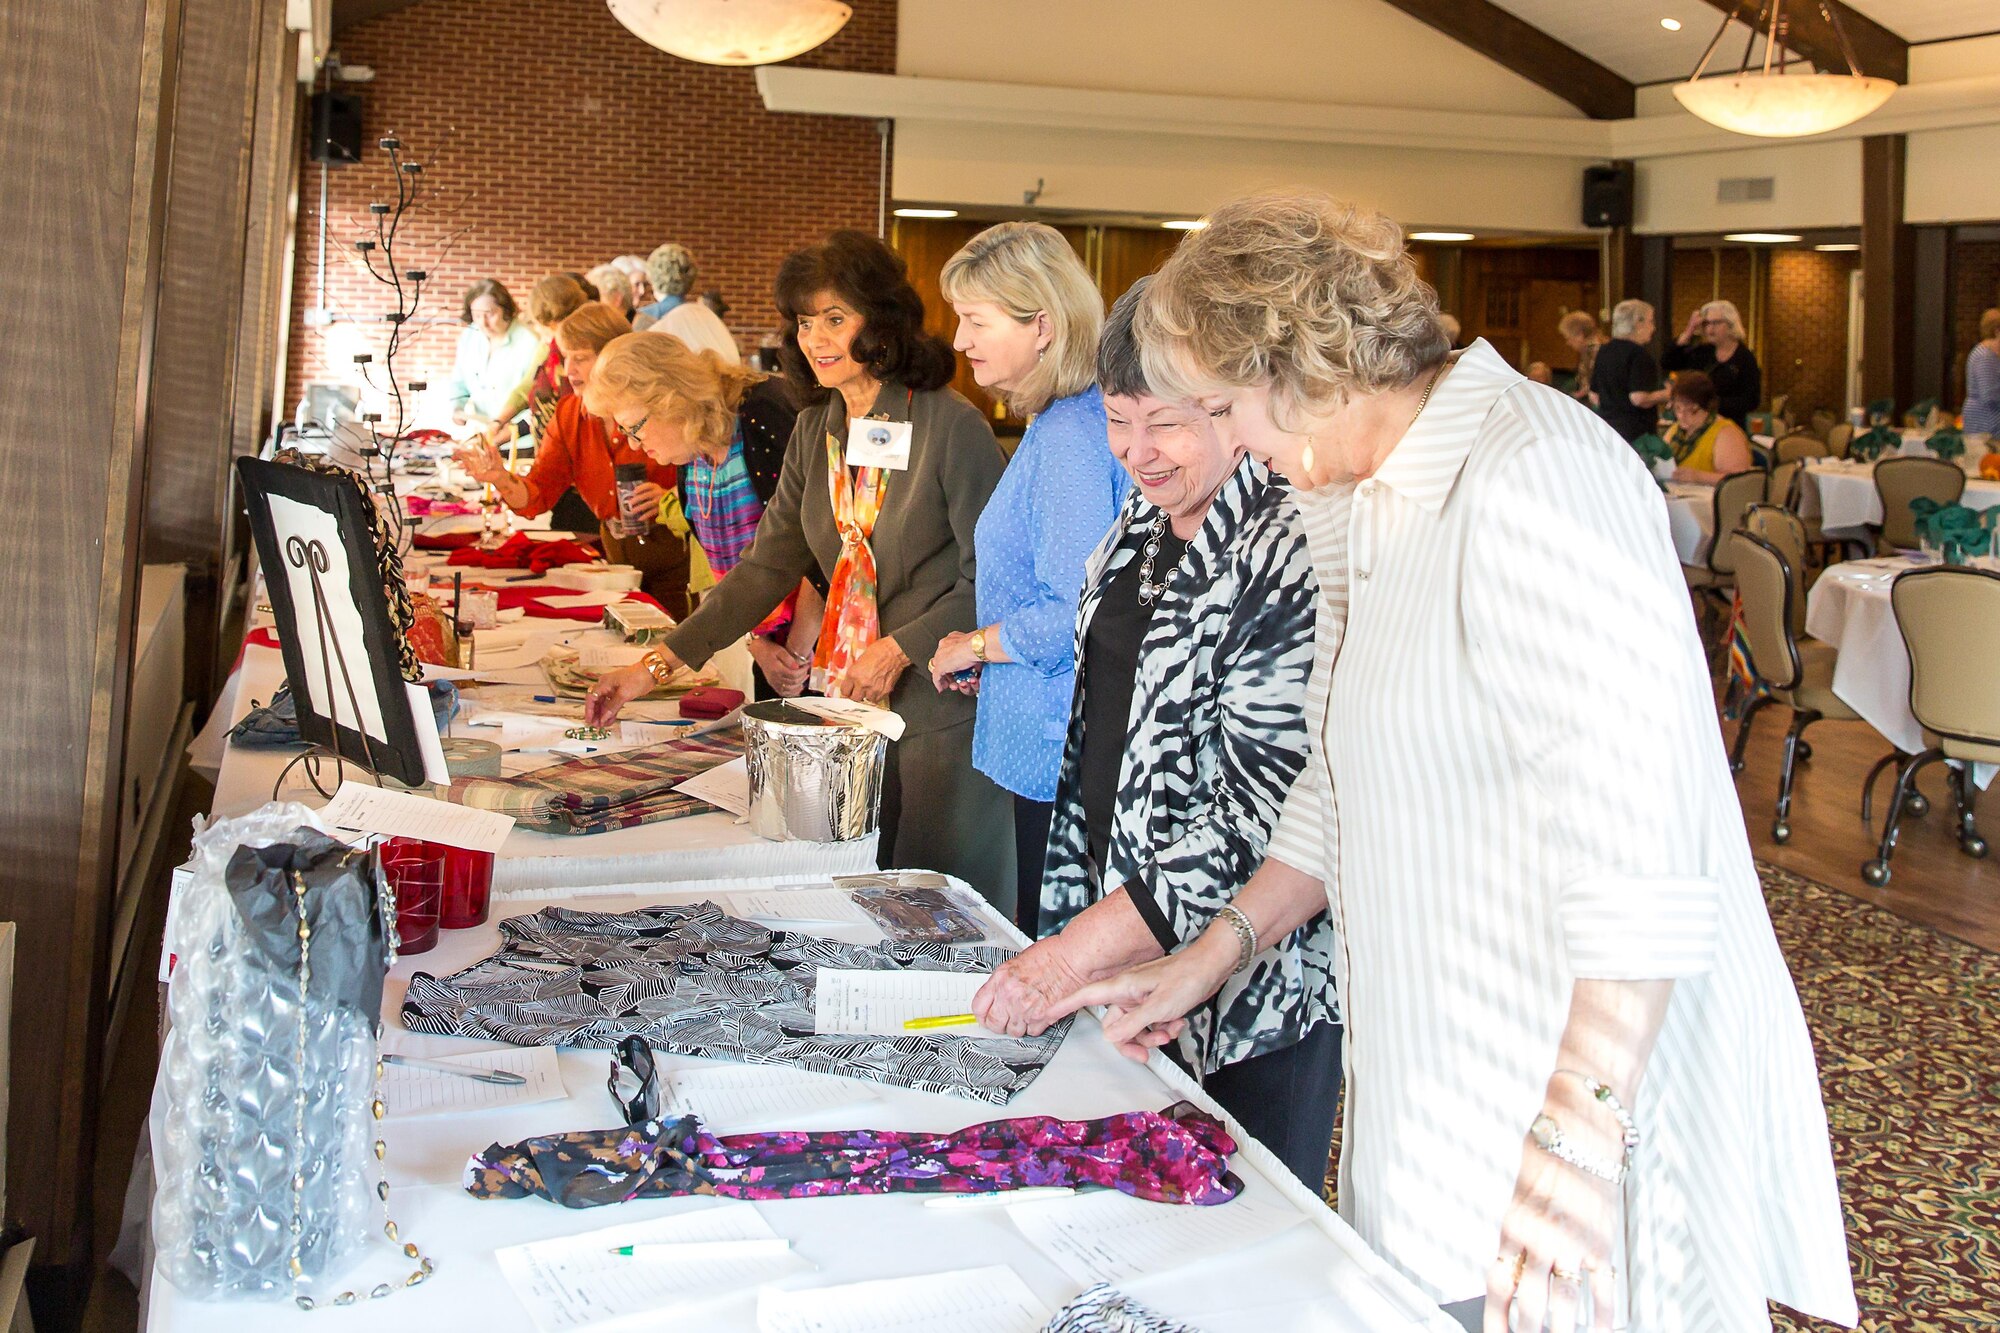 AEDC Woman’s Club meeting participants view Secret Shopper Items at the Nov. 3 meeting. Pictured left to right are Anne-Marie Pender, Sande Hayes, Violet Nauseef, Shirley Clark, Wanda Gobbell and Susie Schulz. (Courtesy photo)